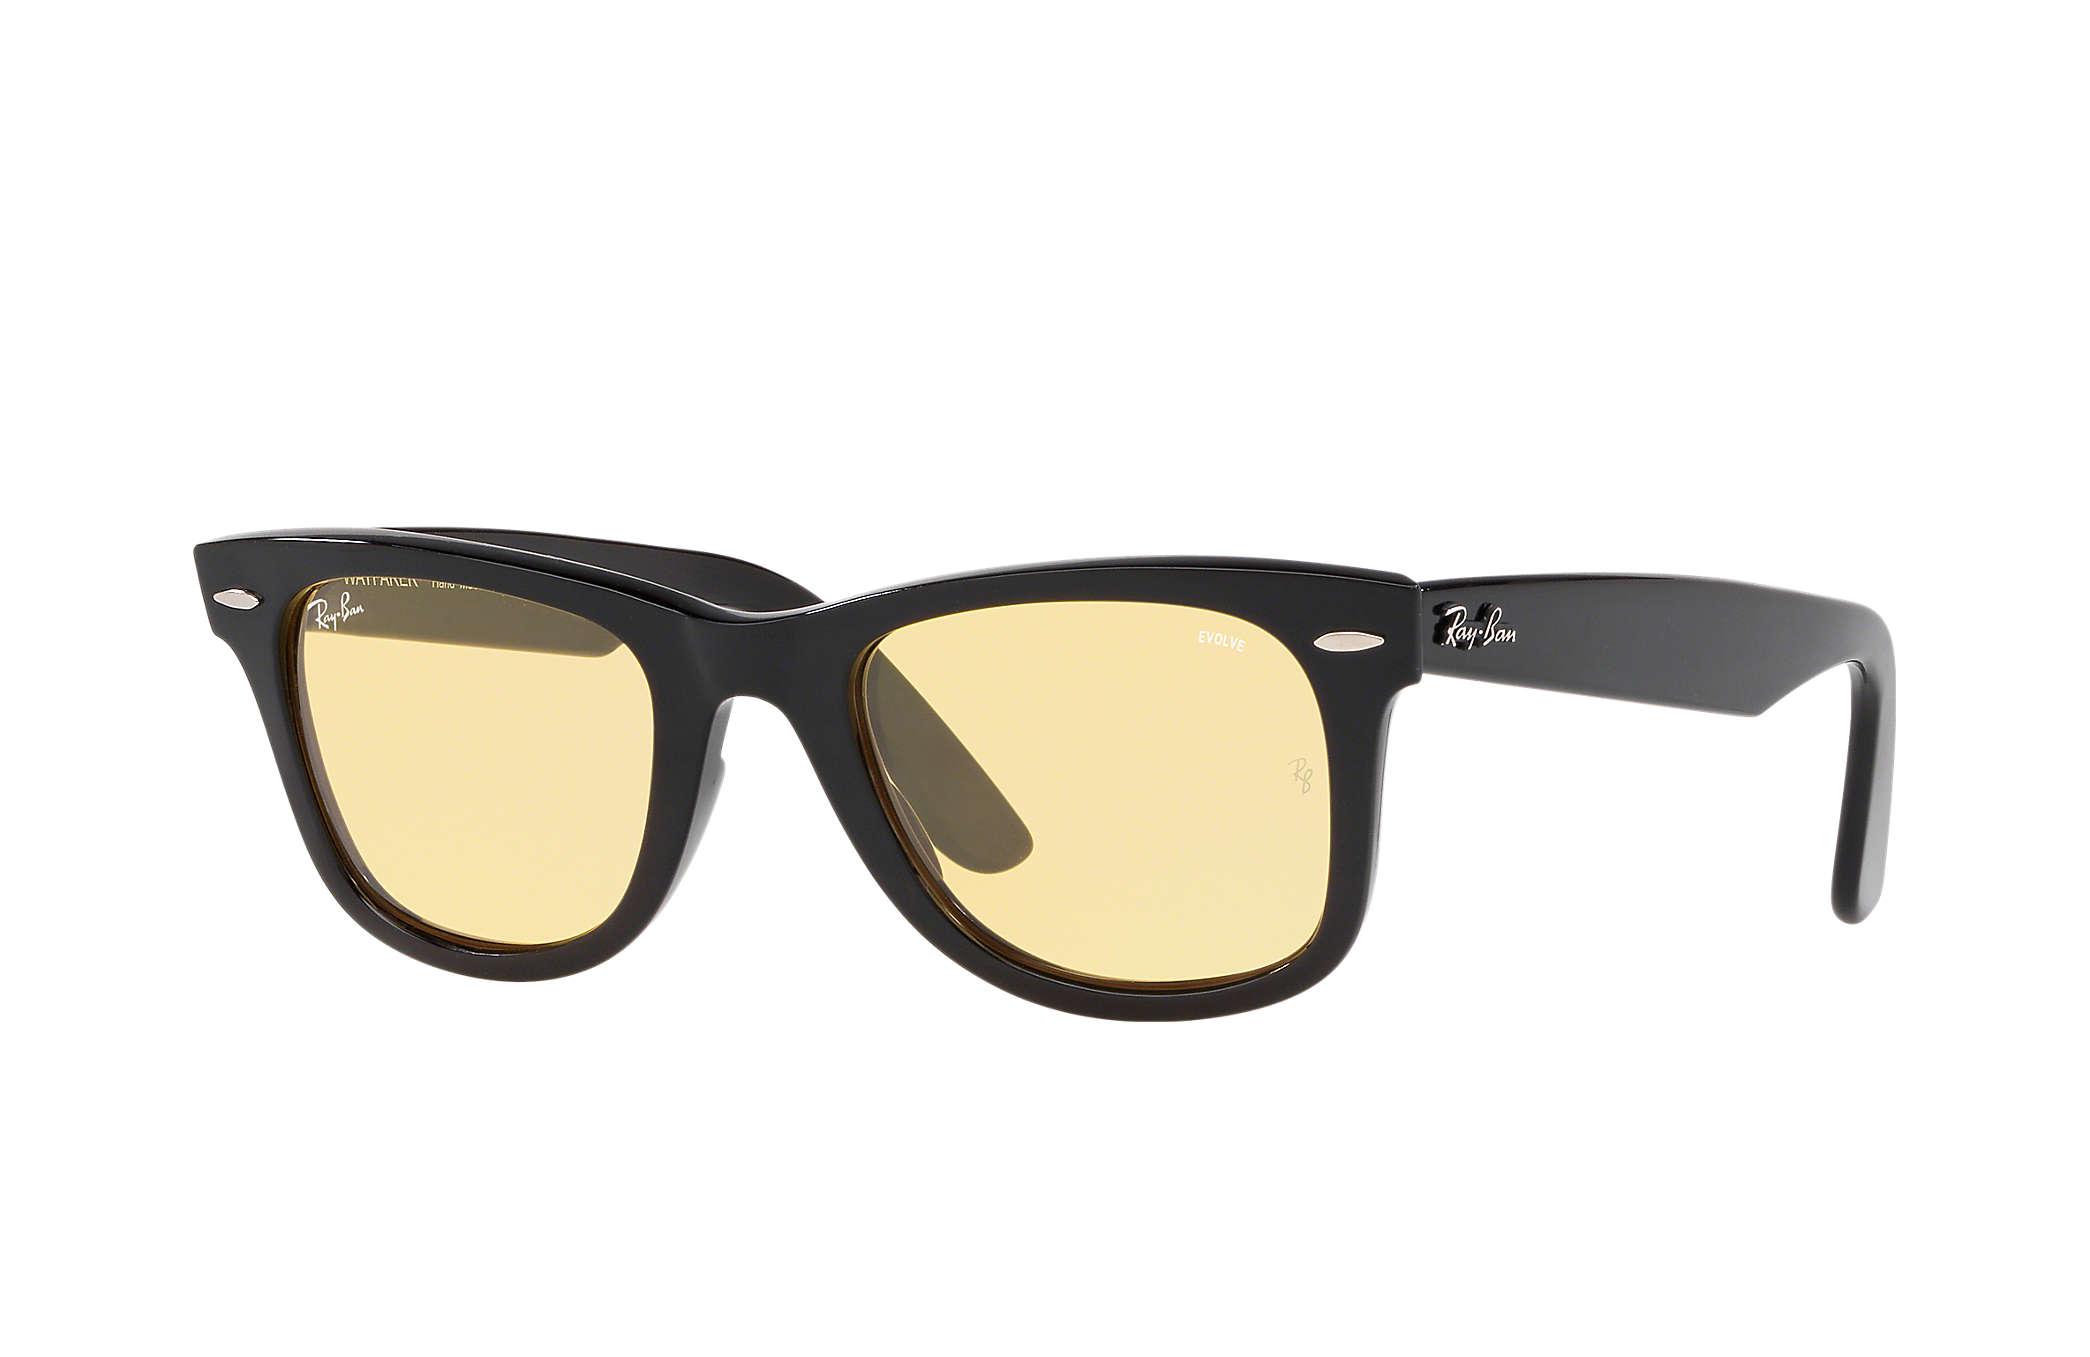 Ray-Ban Wayfarer Evolve- Exclusive Edition in Black | Lyst